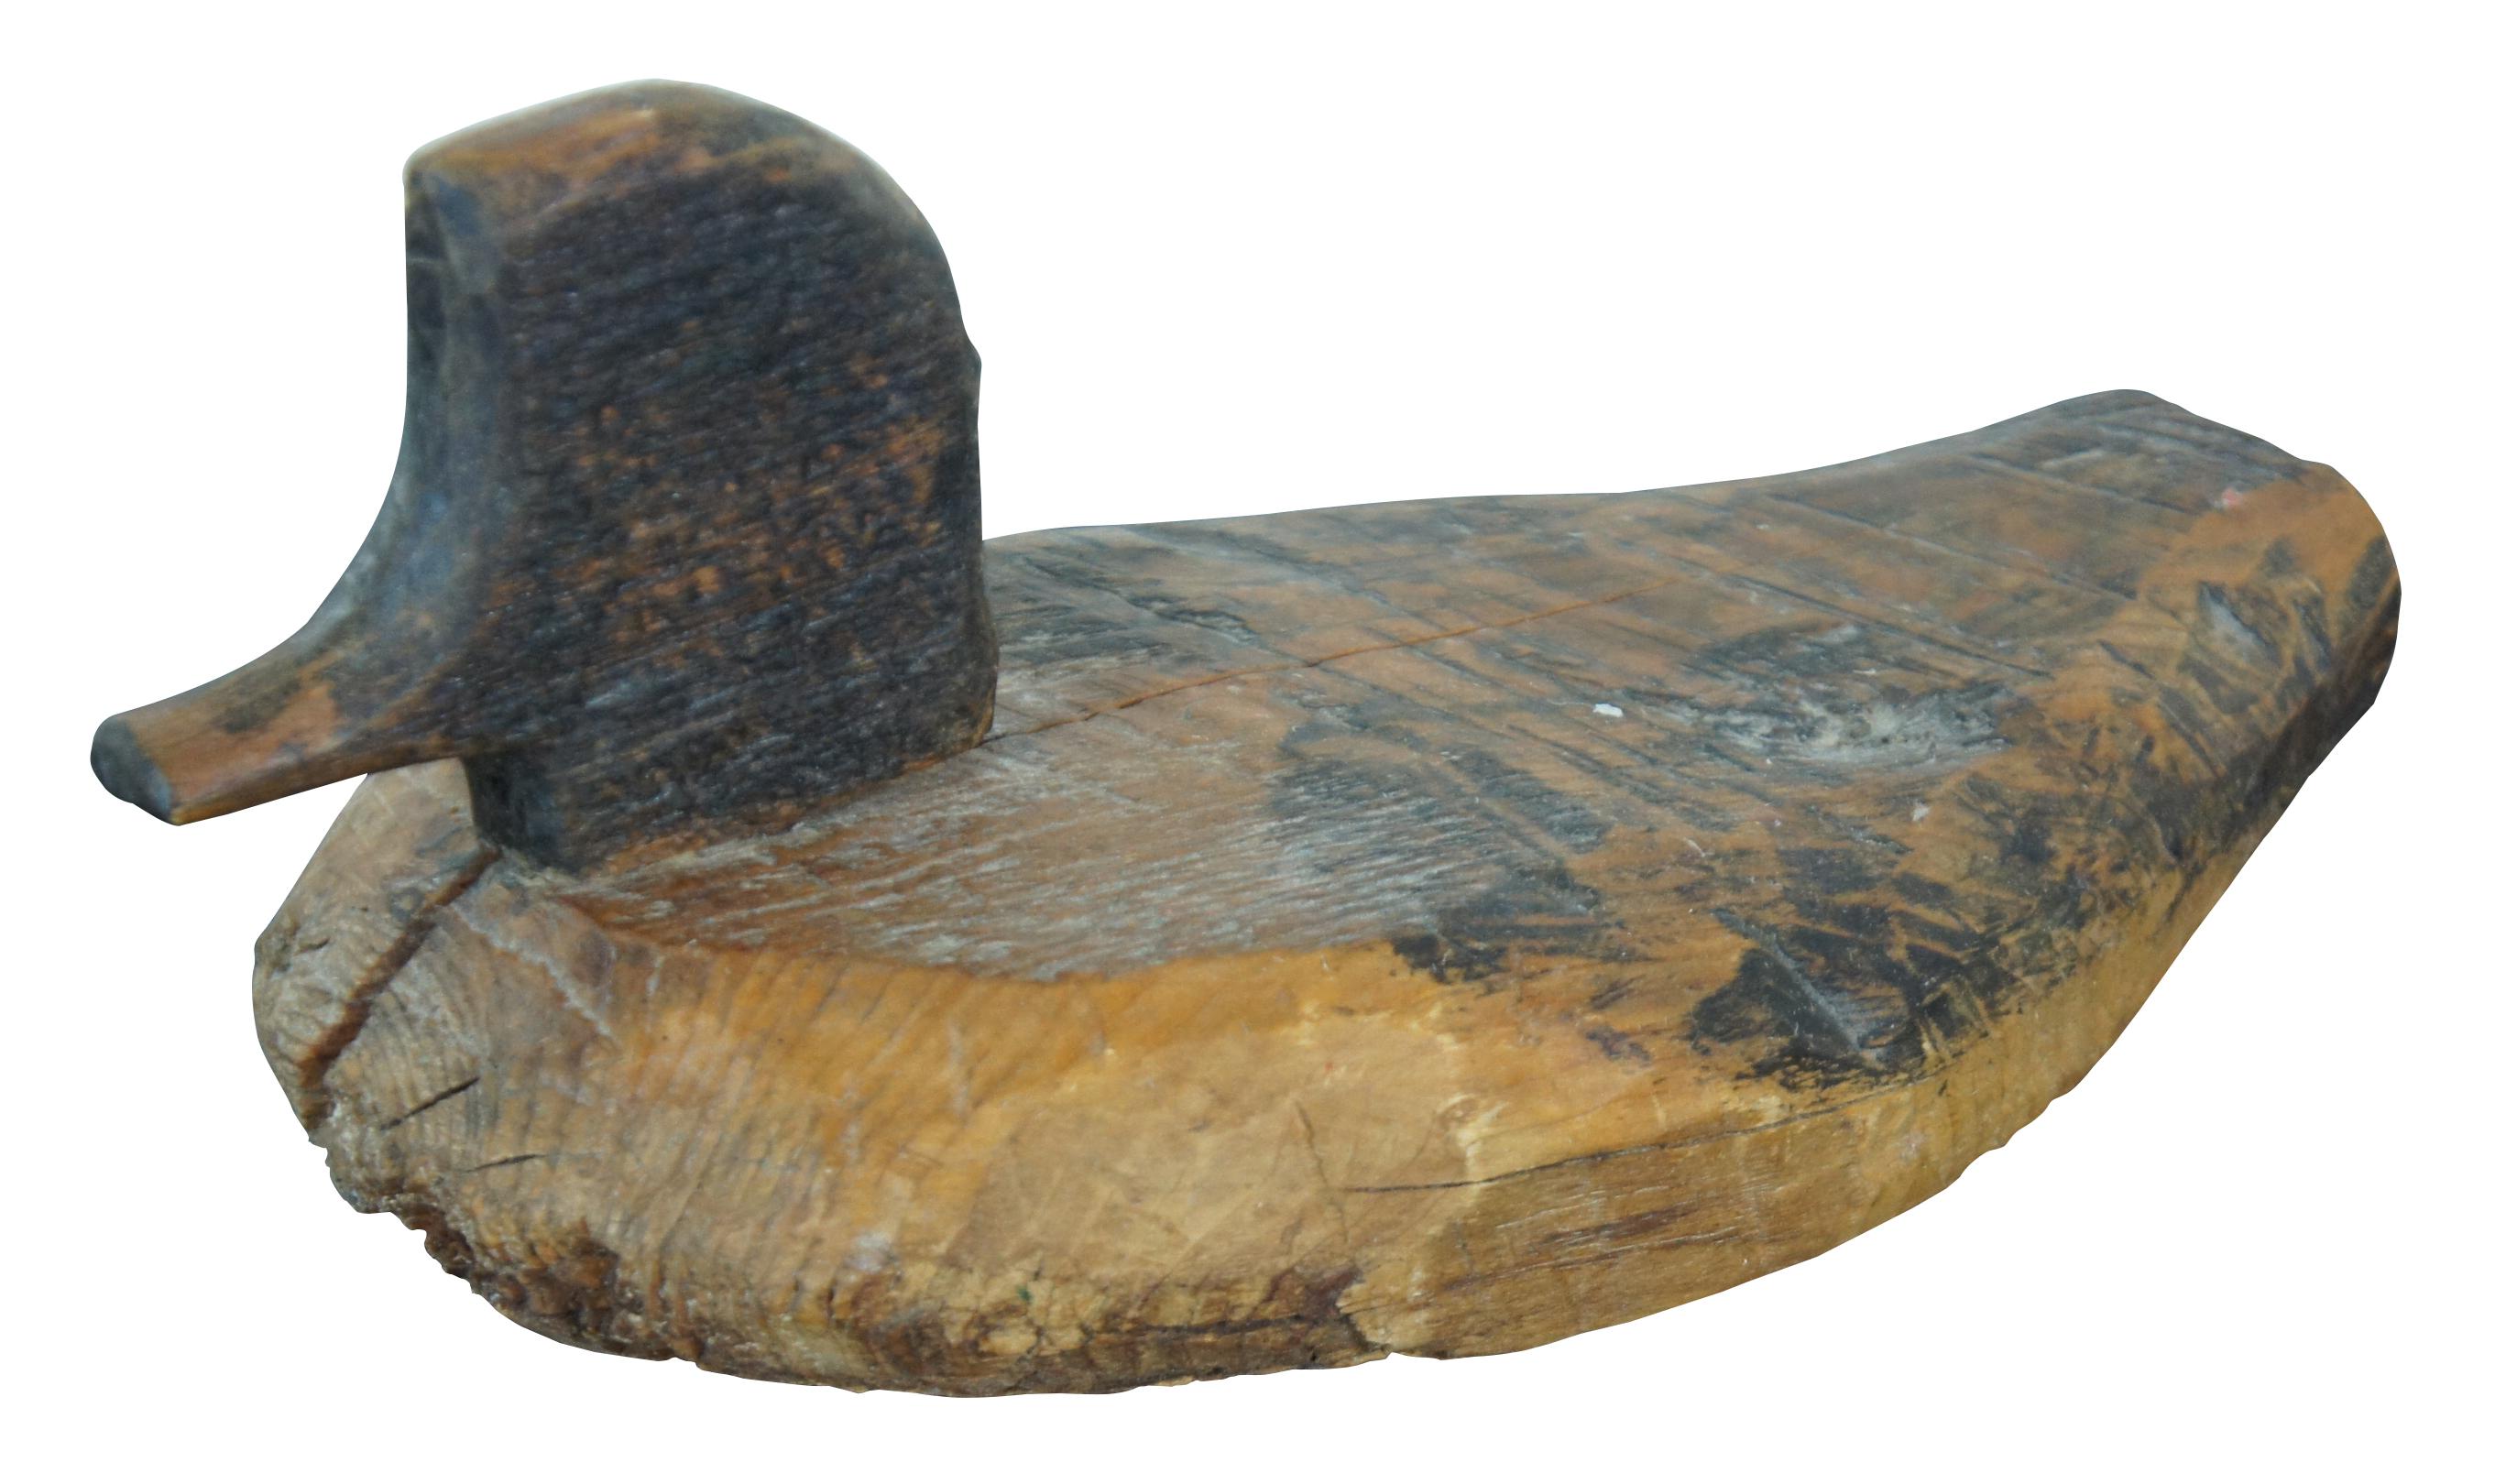 Antique duck decoy, carved of pine featuring primitive form.
